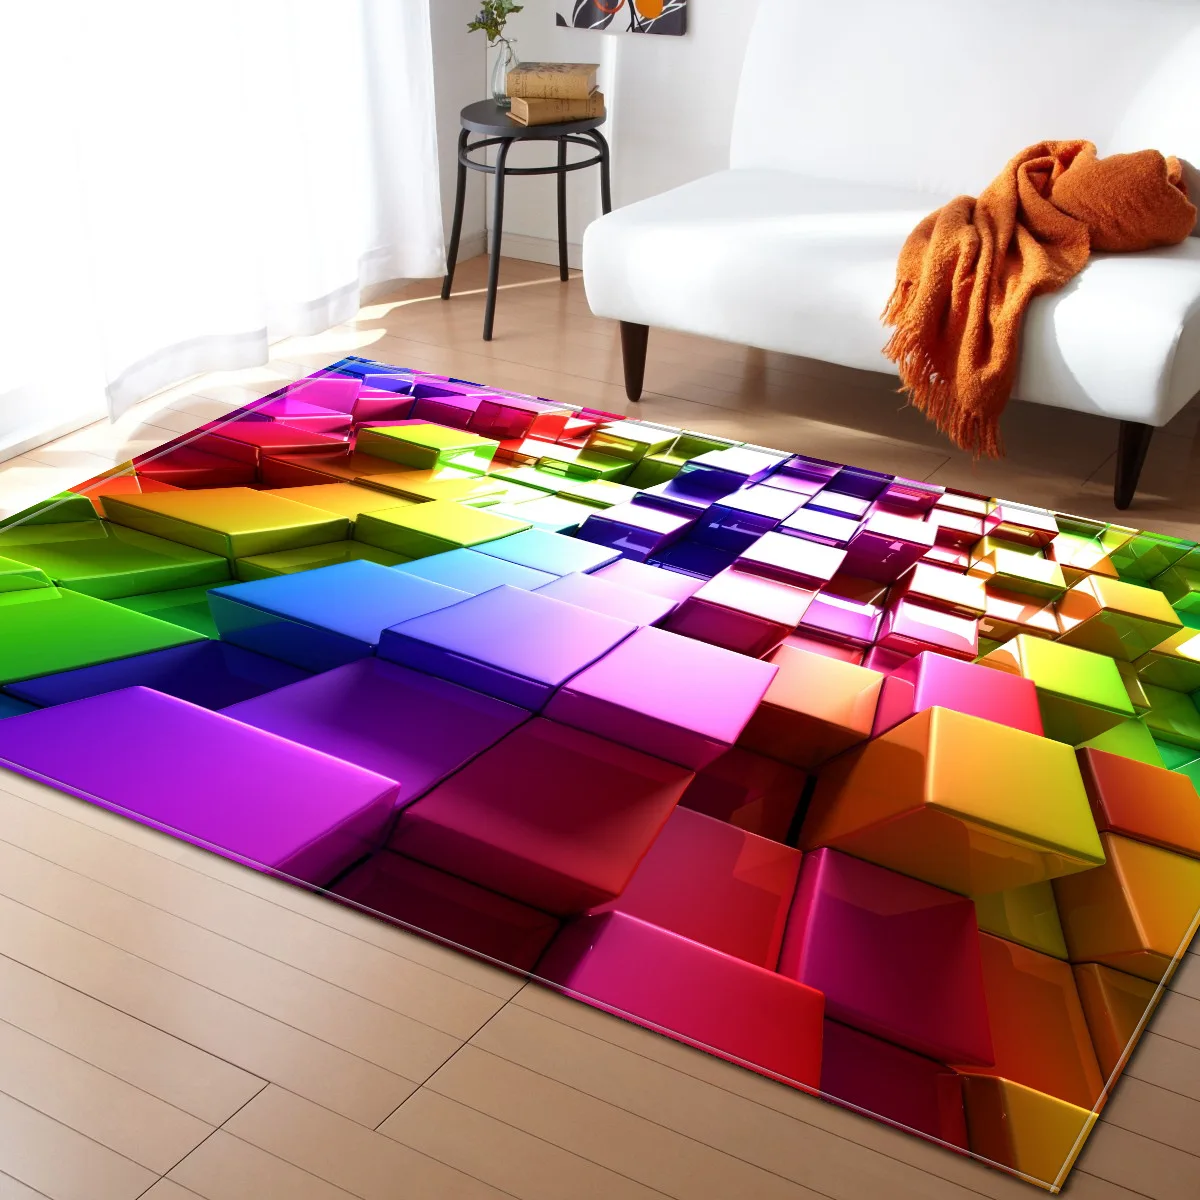 

3D Carpets Soft Flannel Area Rugs three-dimensional Printed Mat Rugs Anti-slip Large Rug Carpet for Living Room Bedroom Decor